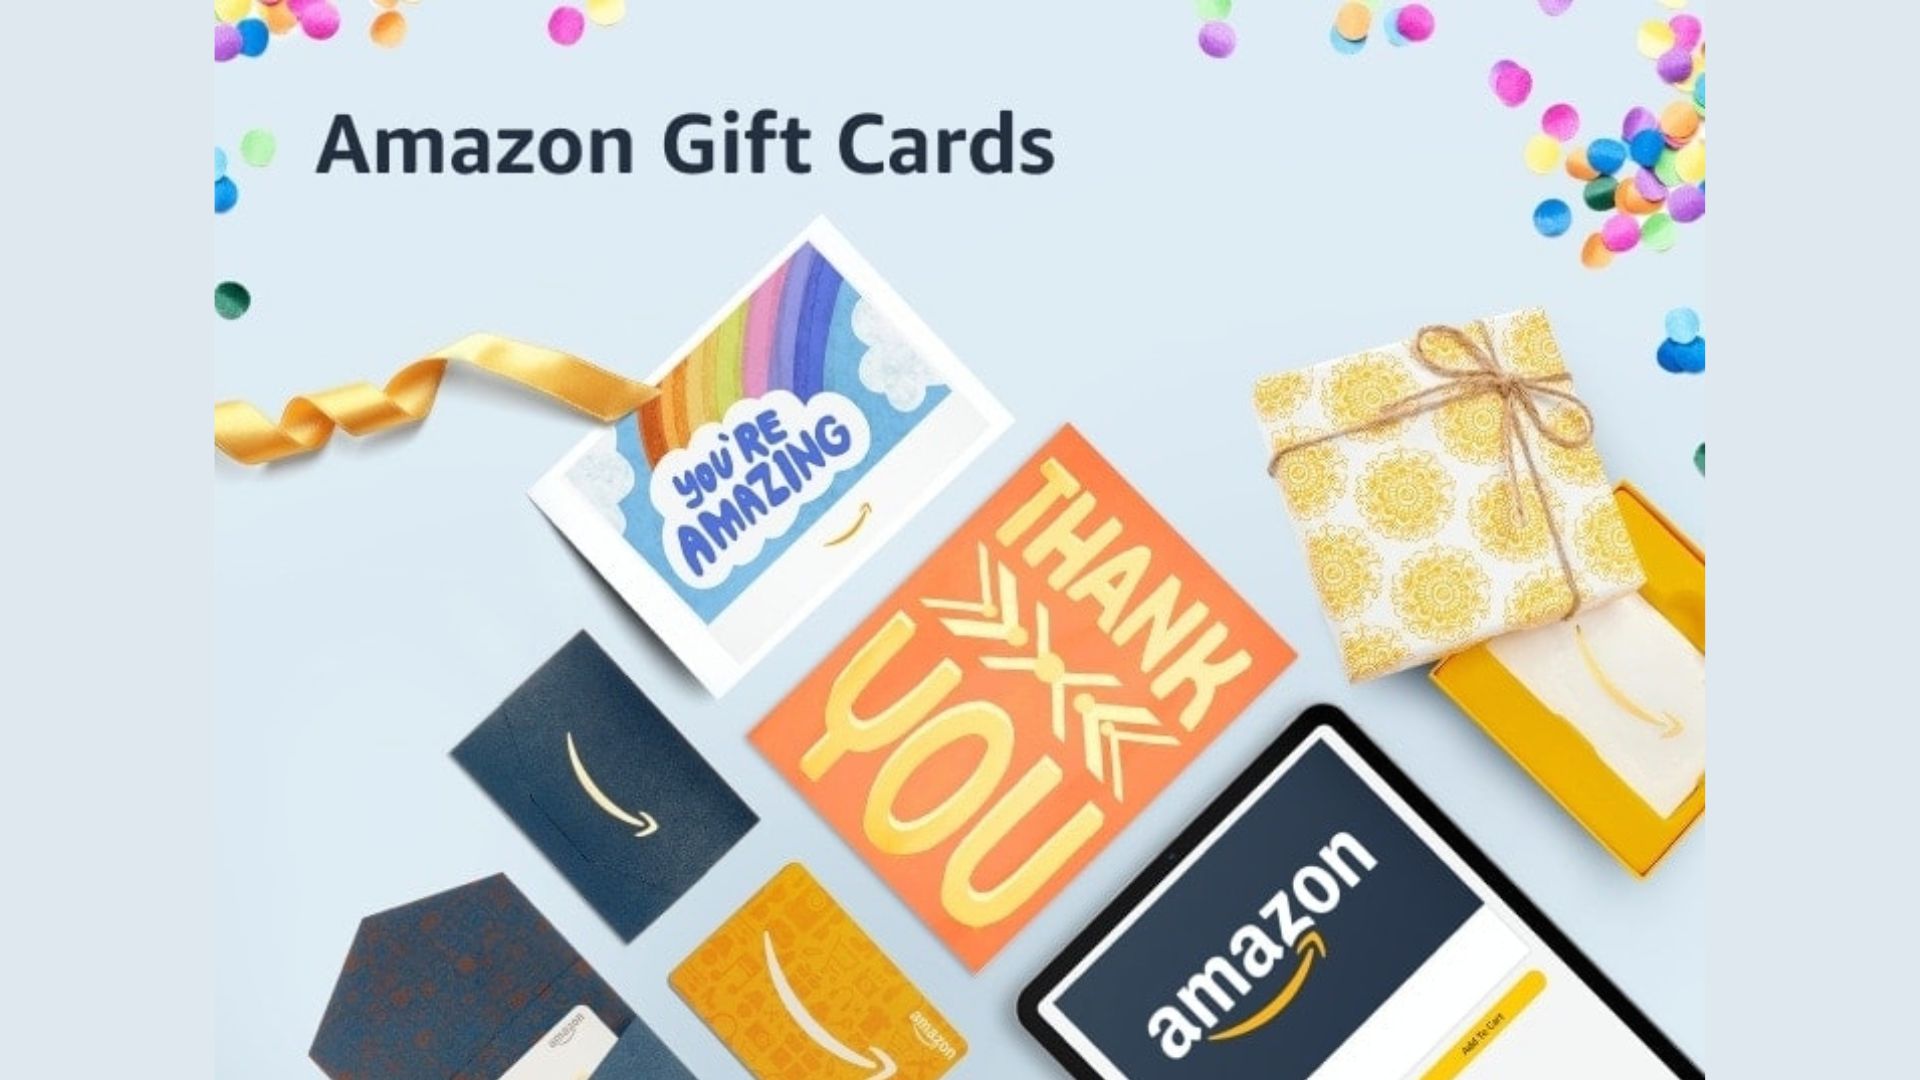 How to get free Amazon Gift Cards Free $50 Amazon Gift Card codes - unused amazon  gift card codes. | Amazon gift card free, Amazon gift cards, Free amazon  products